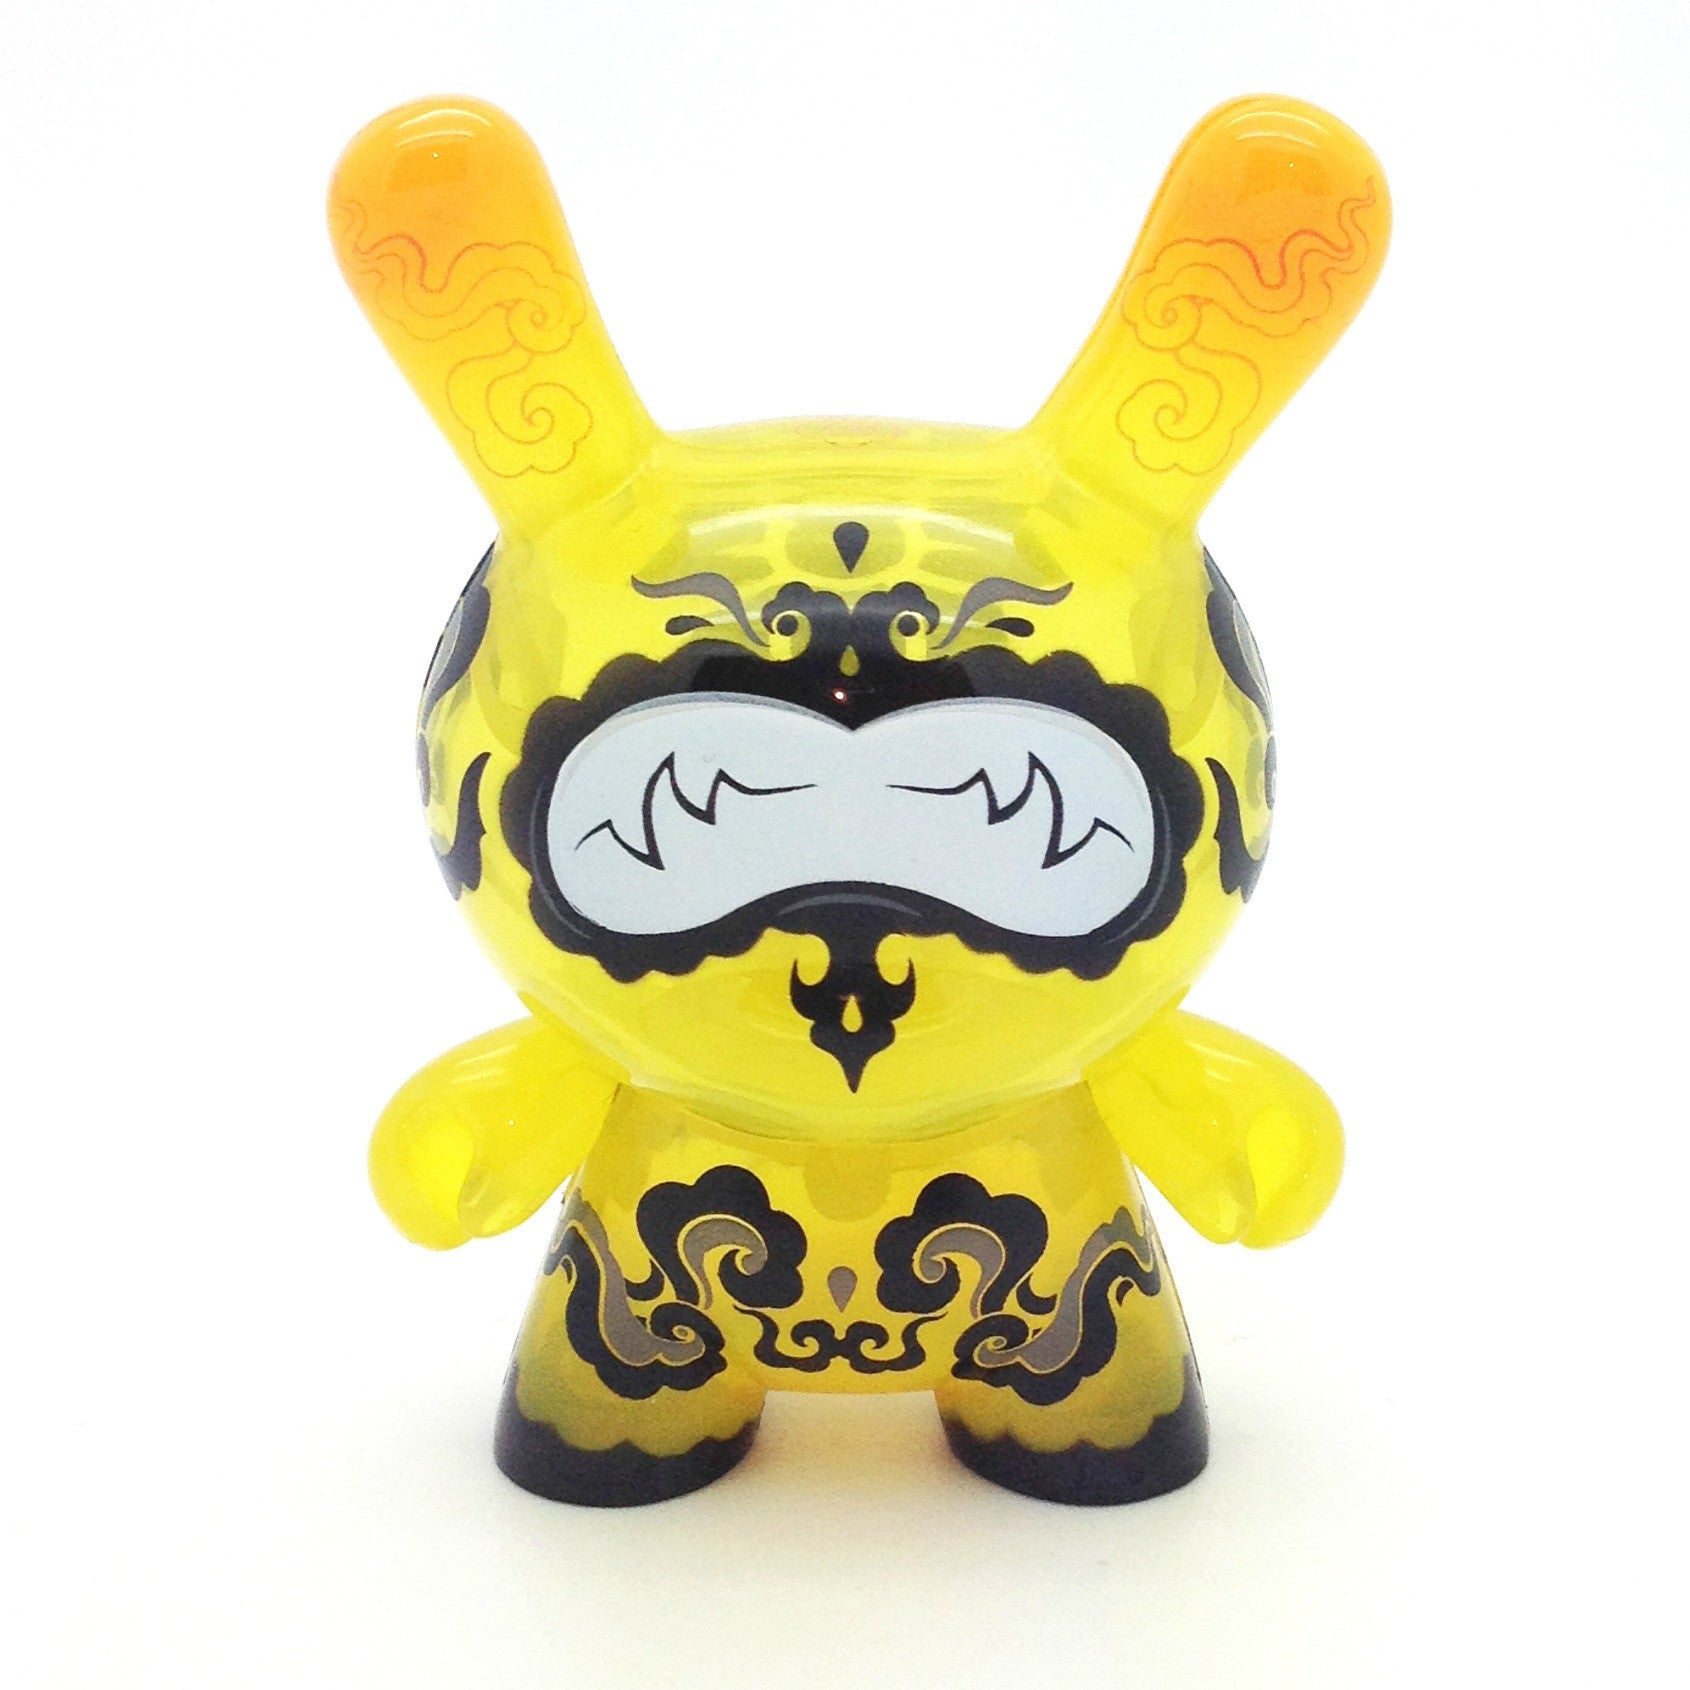 Lemon Drop Dunny by Andrew Bell - Mindzai
 - 1